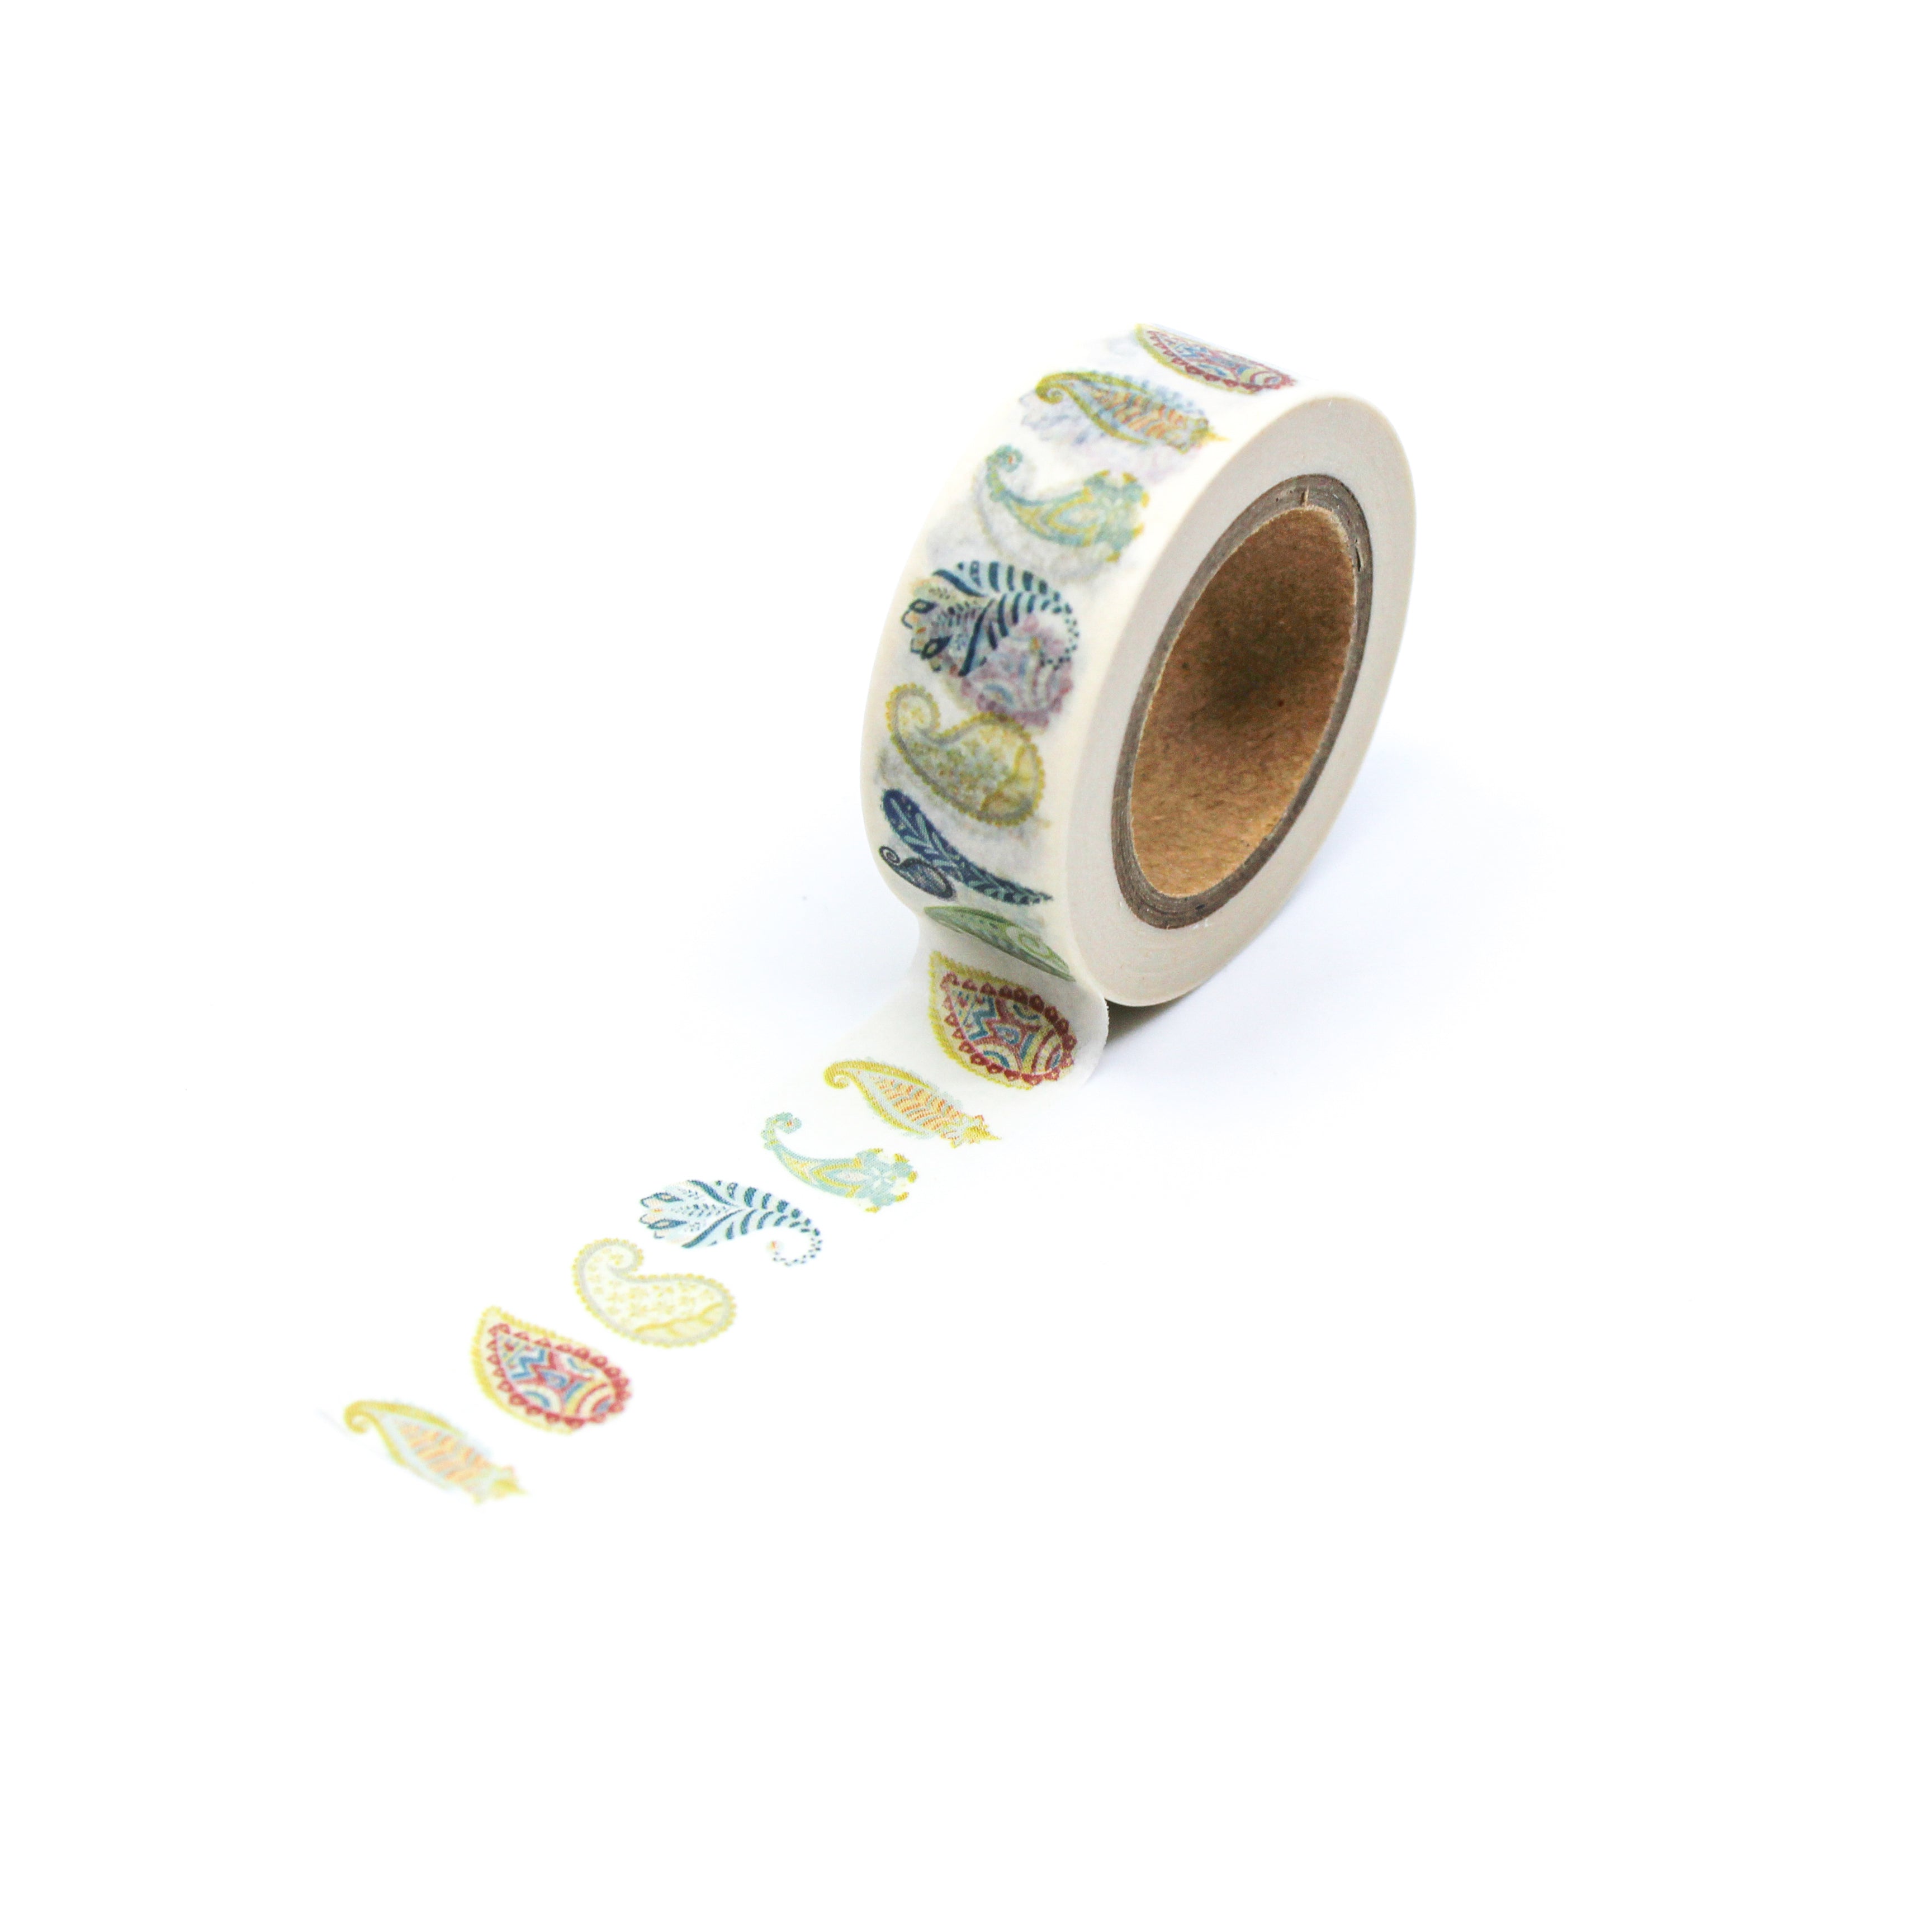 This washi tape is a colorful and cheerful classic paisley pattern. Use this vibrant washi tape for your BUJO spreads and craft projects. This paisley tape is sold at BBB Supplies craft shop.